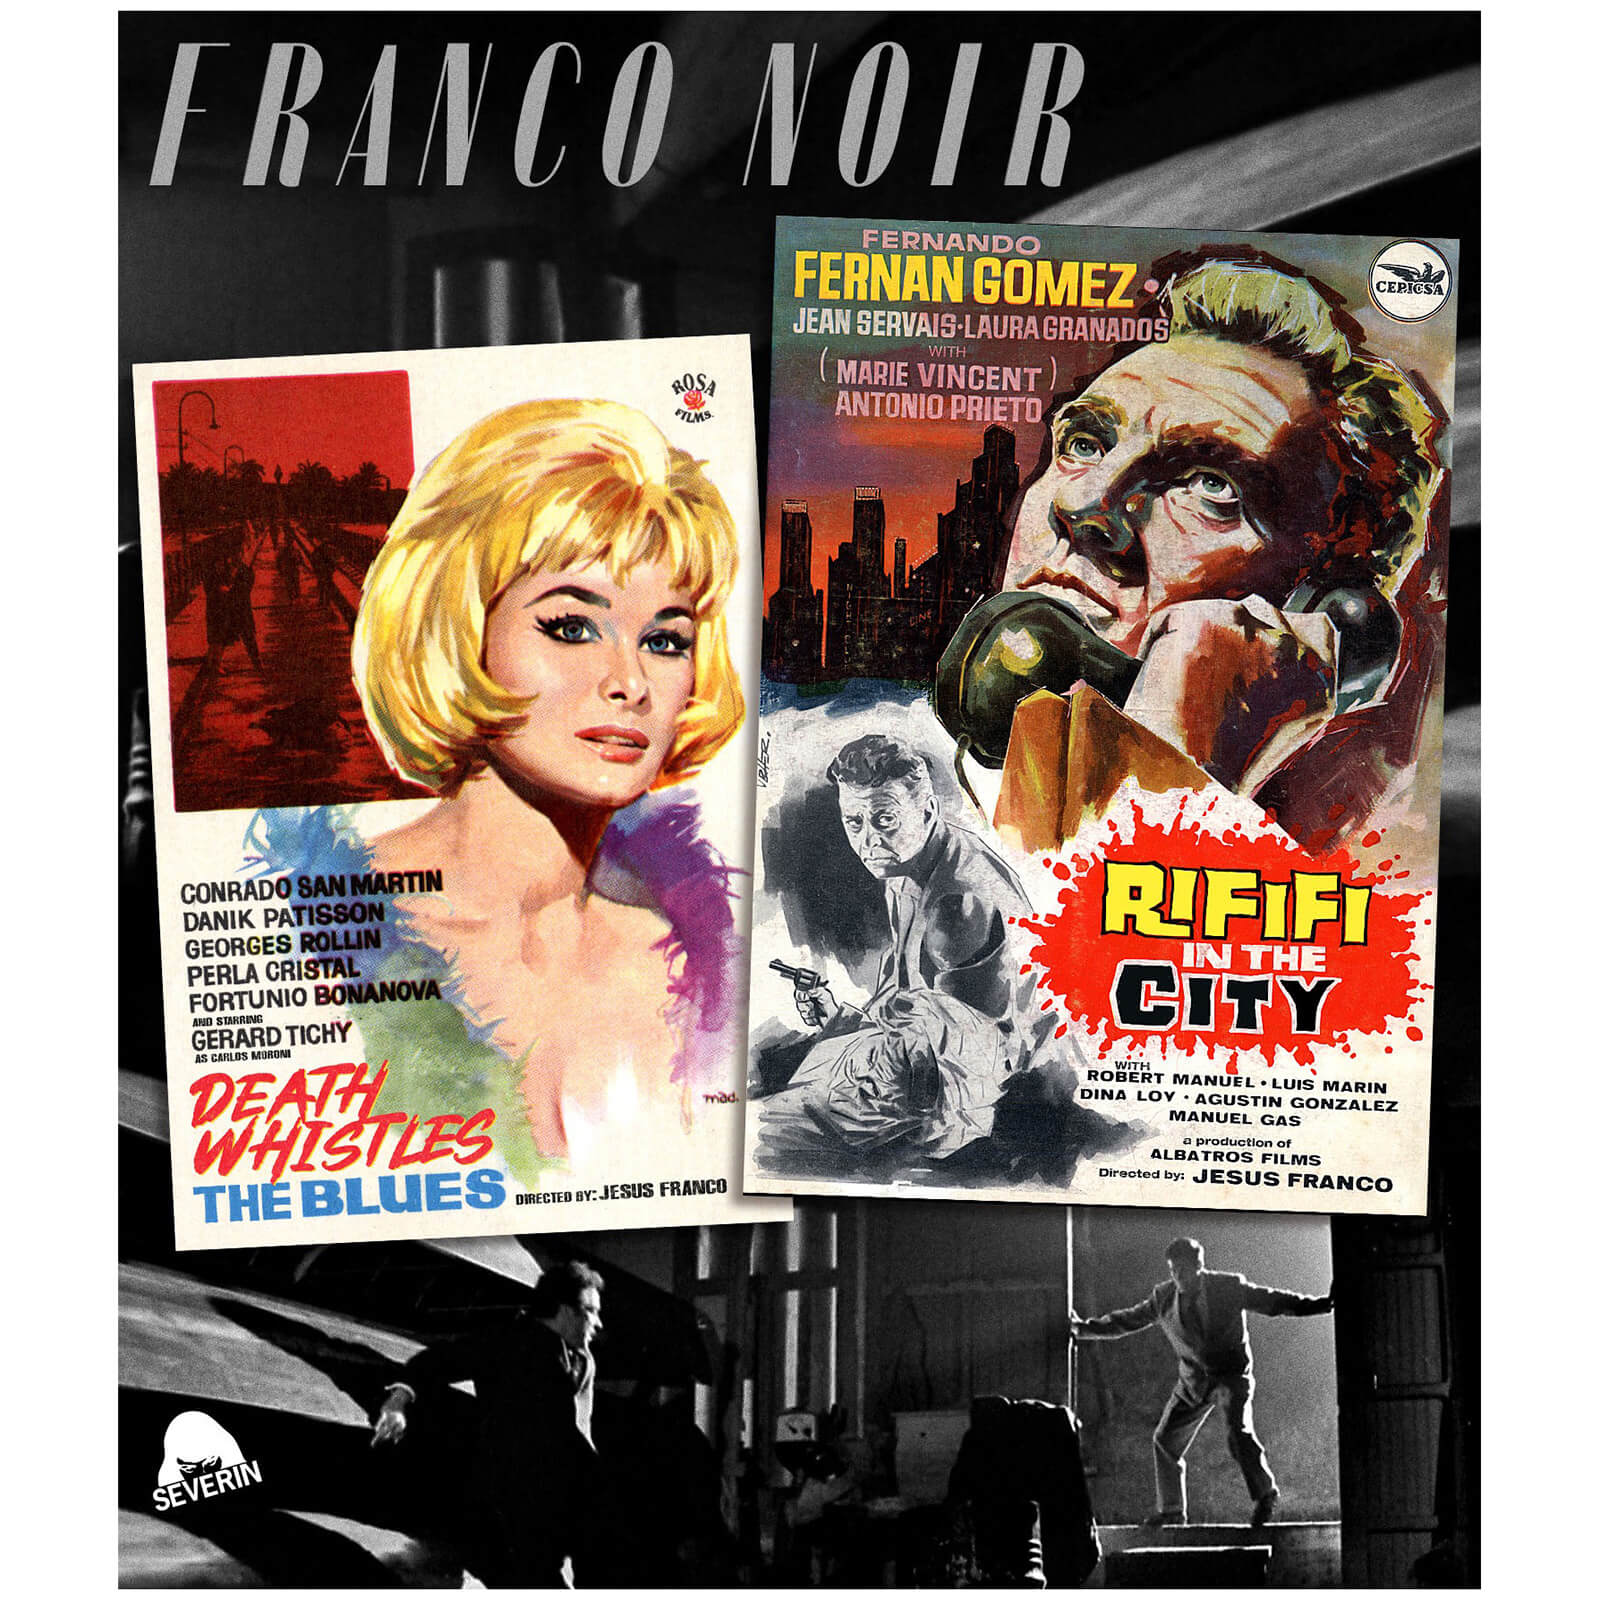 franco noir: death whistles the blues / rififi in the city (us import)